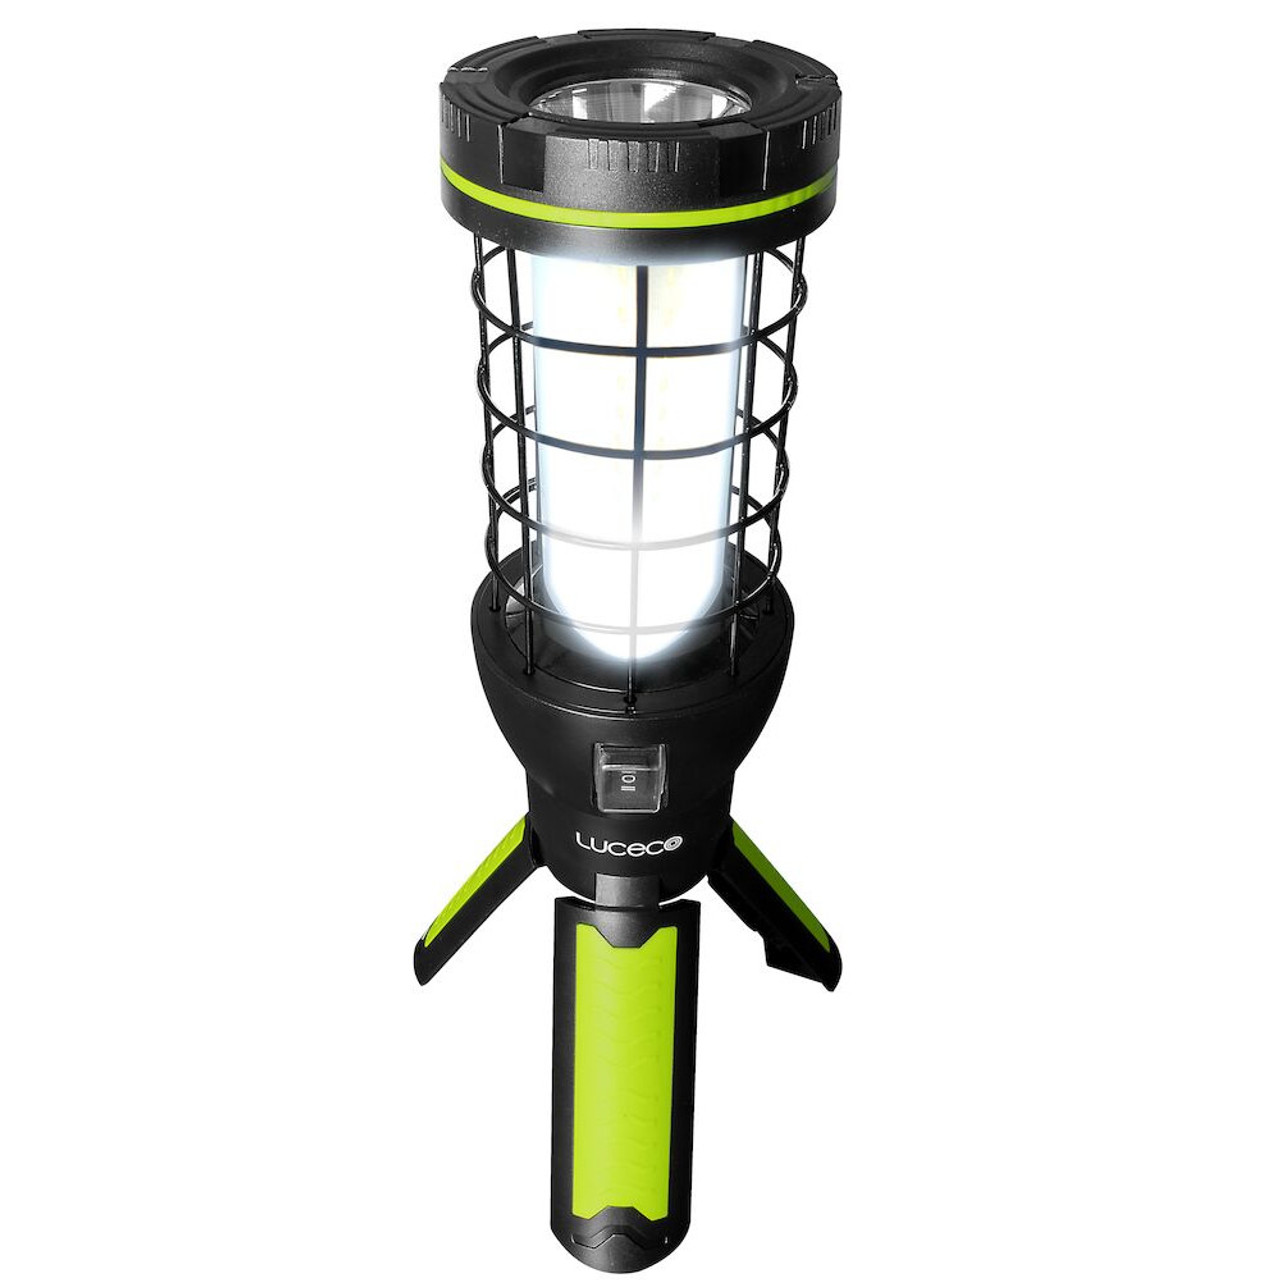 LED Rechargeable Cage Work Light 10W 600lm 6500K 360 Degrees Luceco